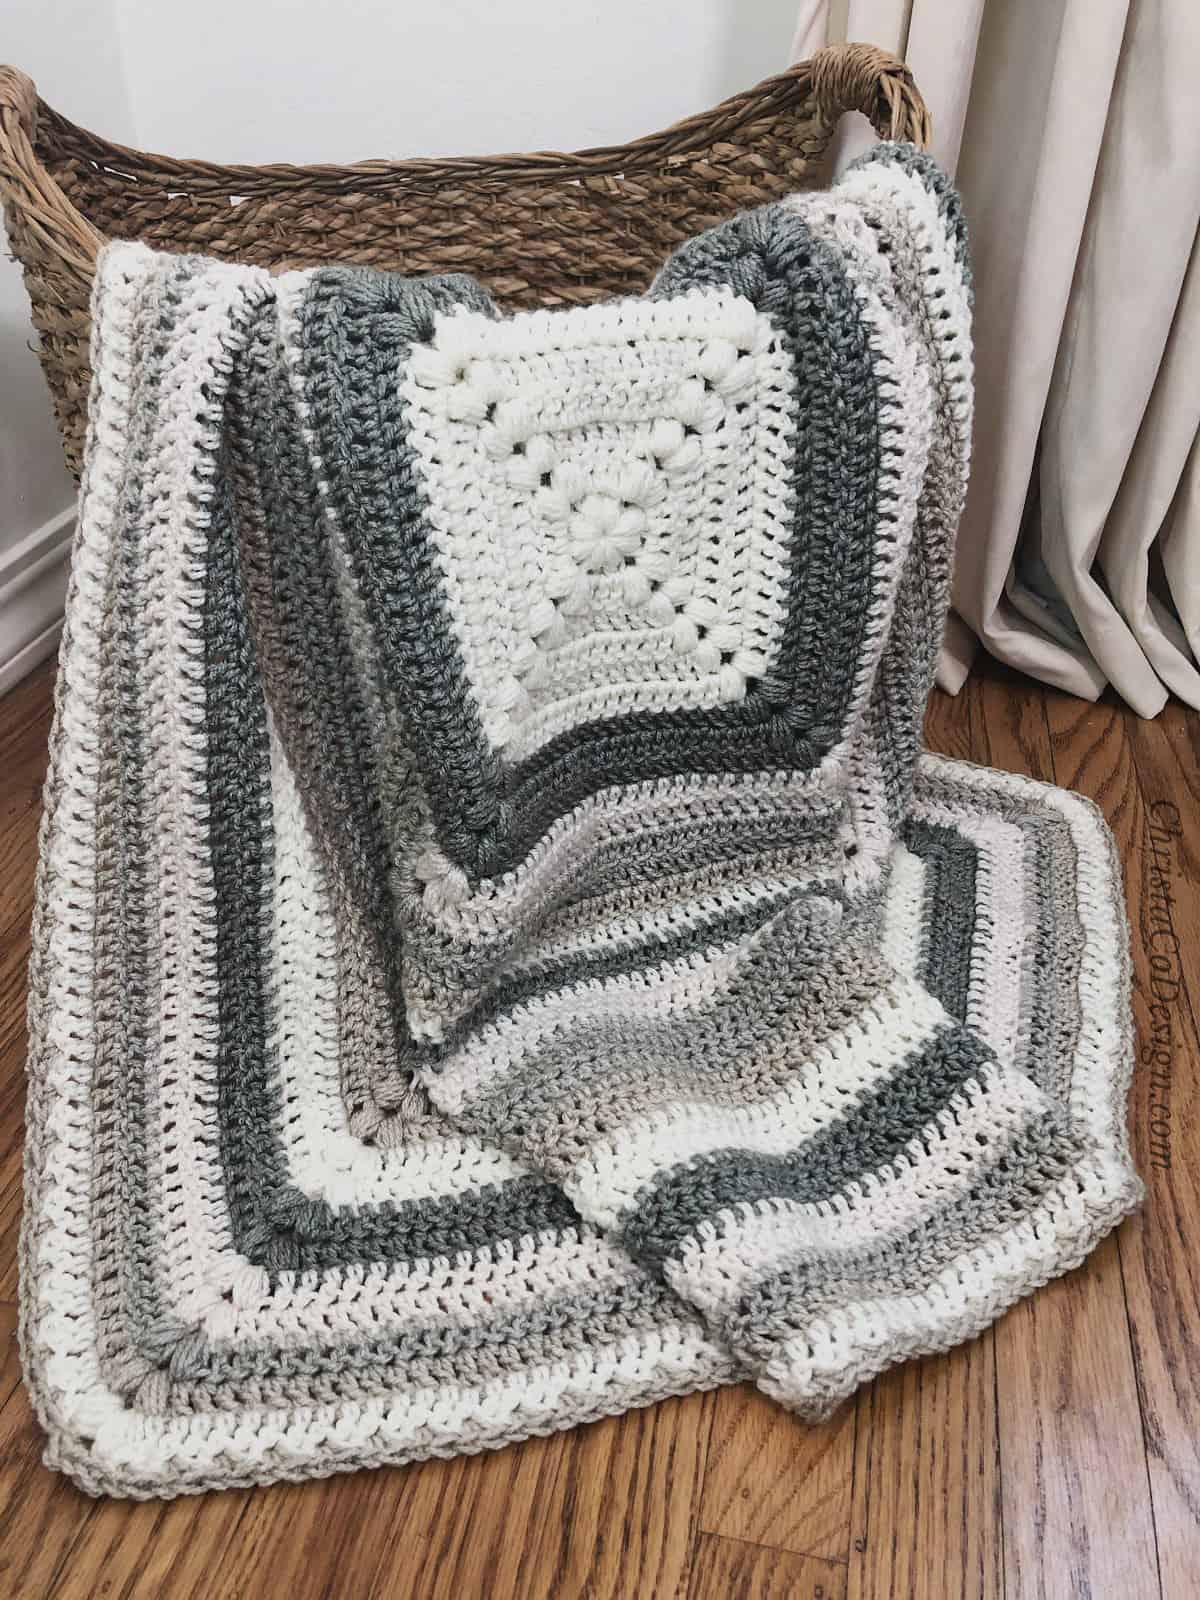 picture of grey and white crochet puff stitch blanket in basket